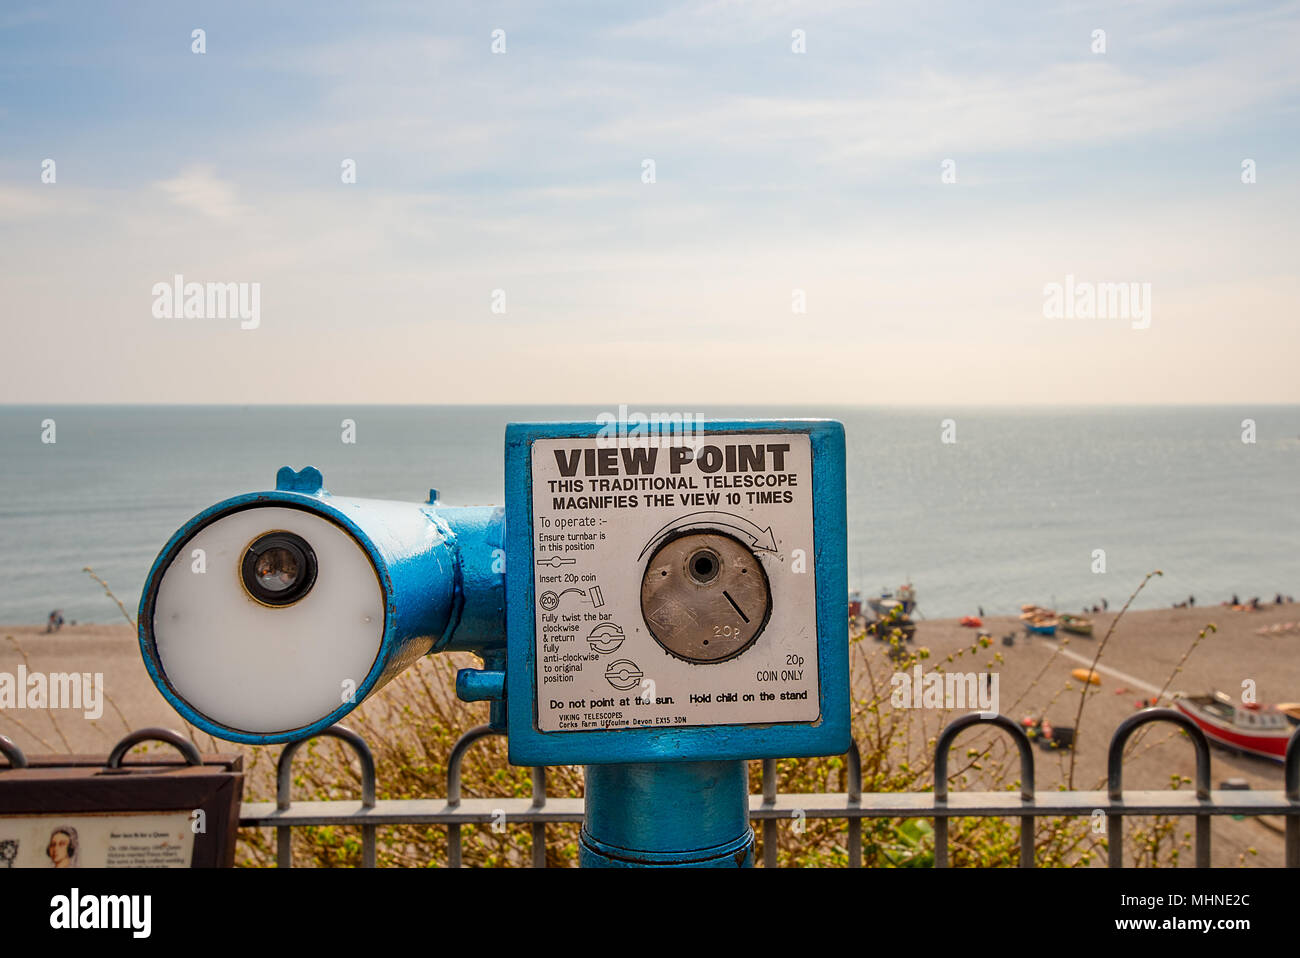 A traditional coin operated View Point telescope over looking the seafront of the village of Beer, Devon, England. Stock Photo